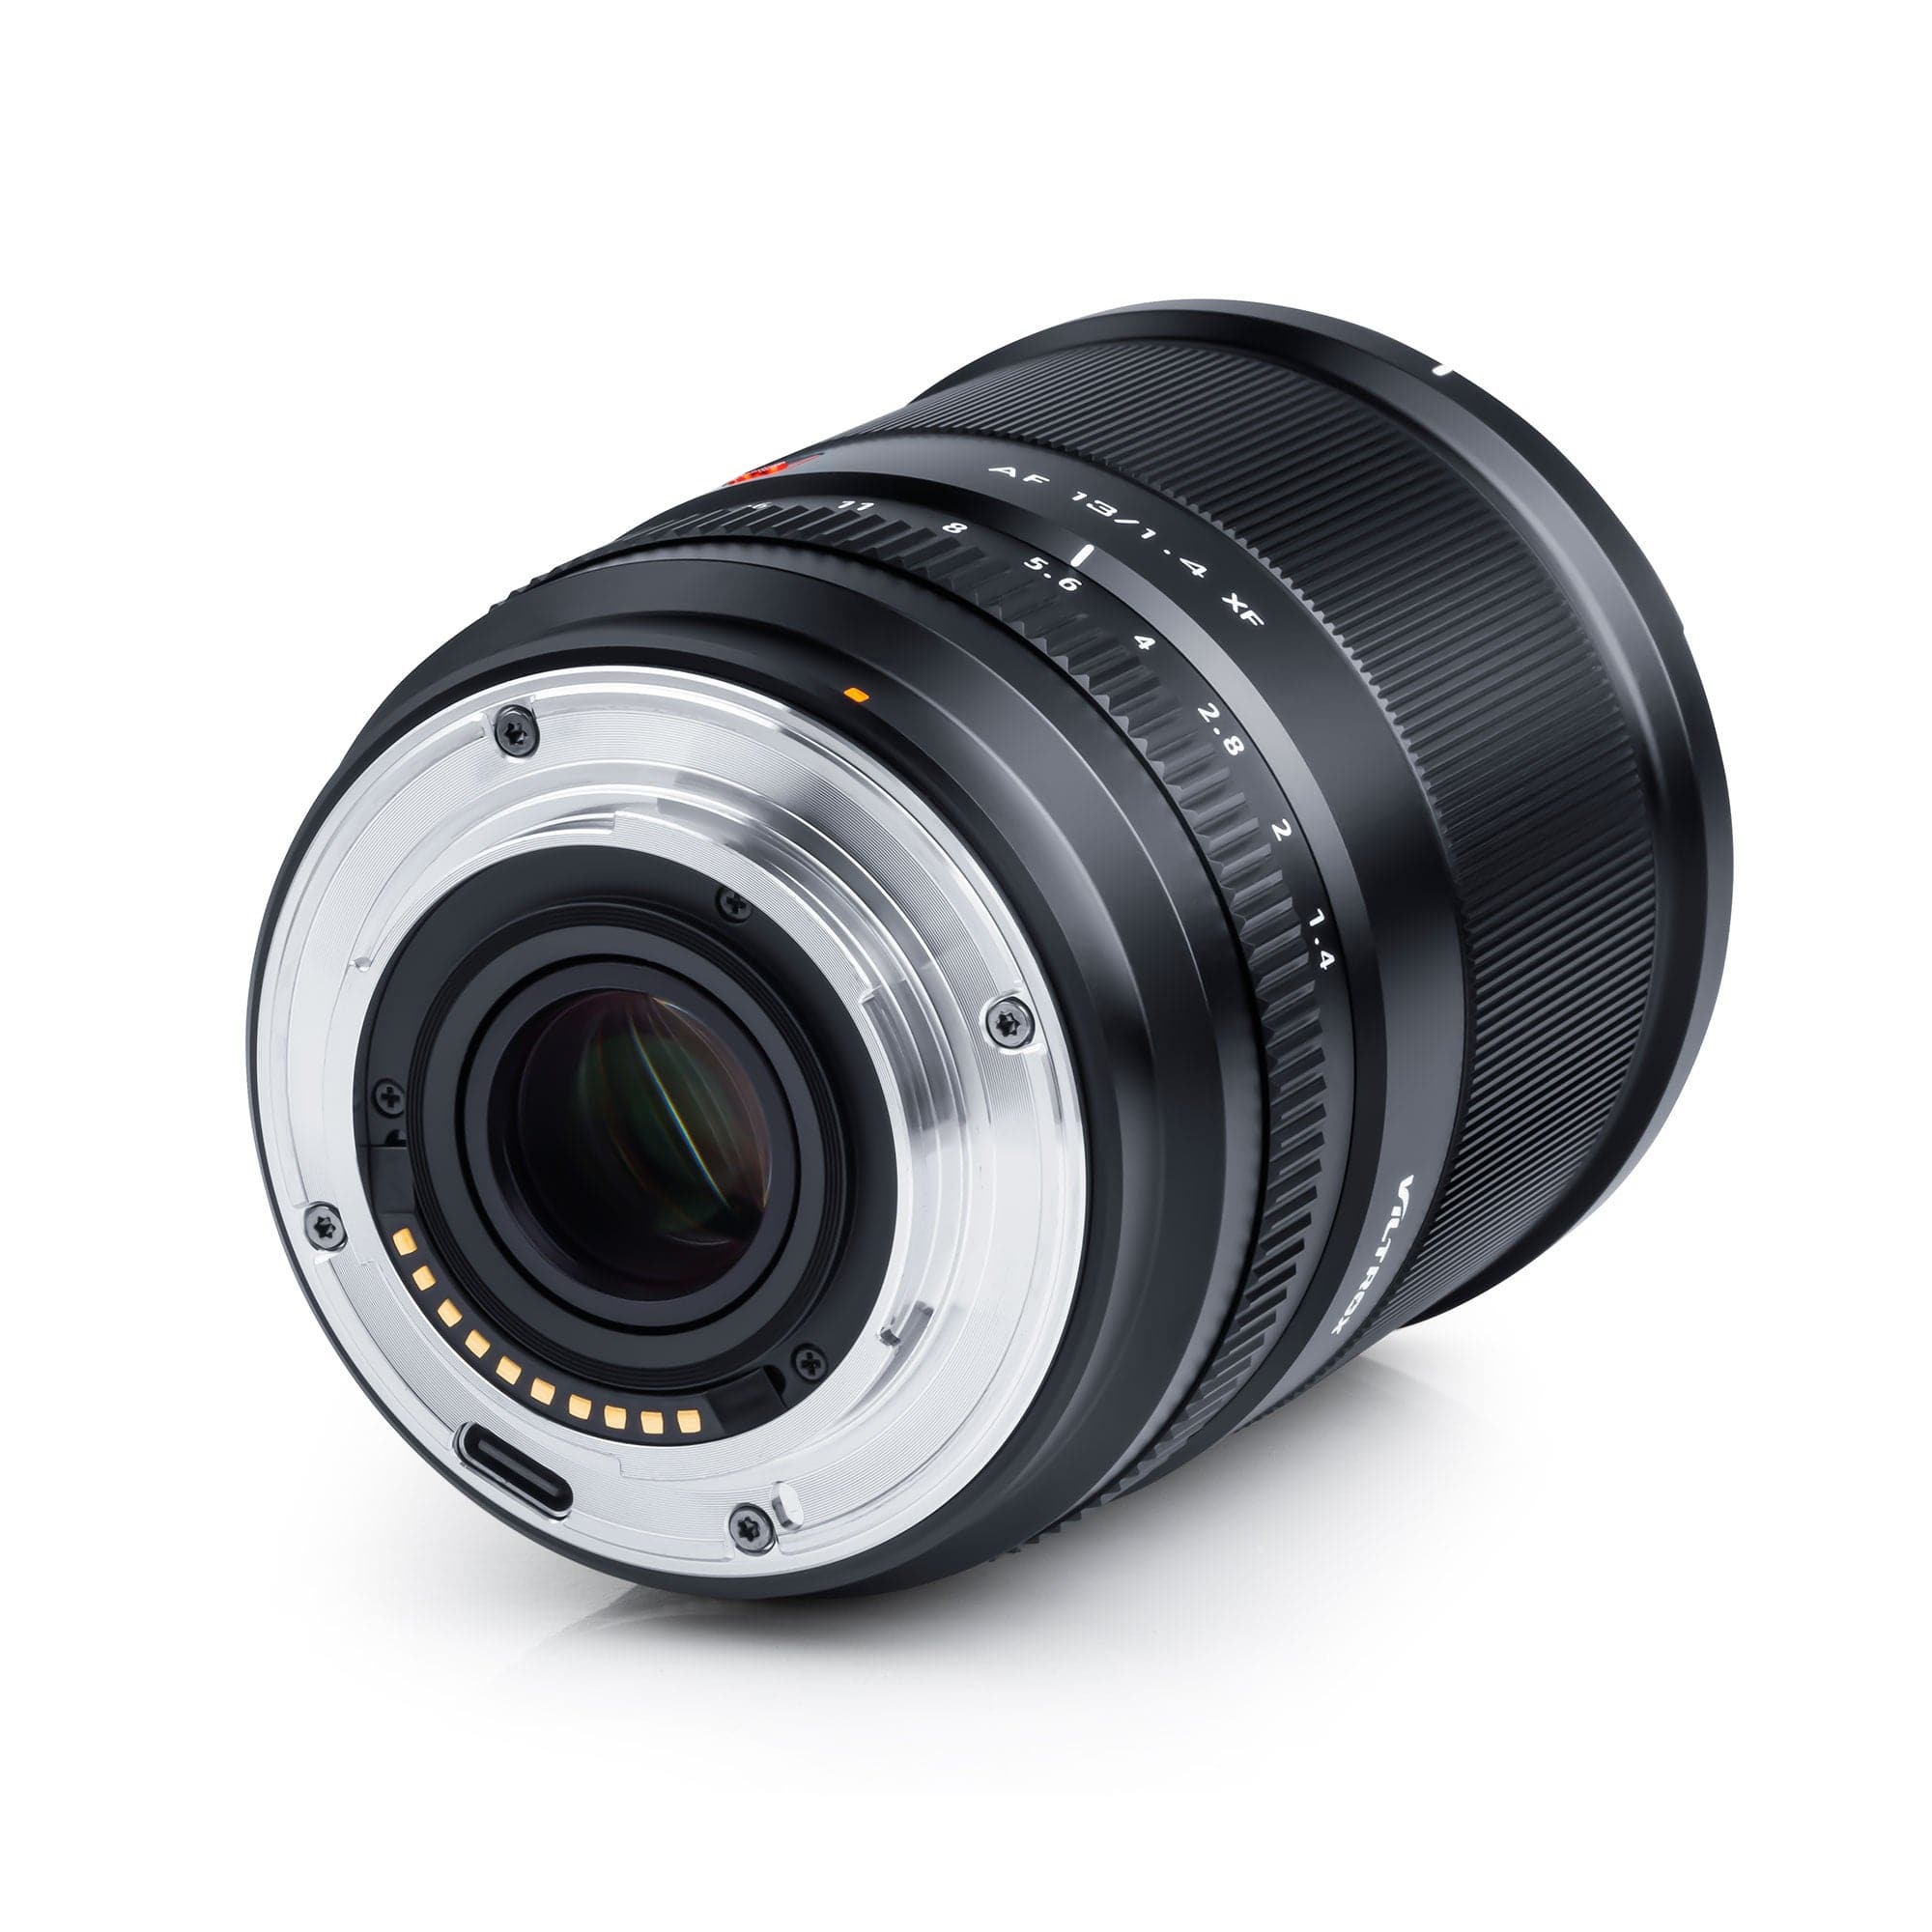 VILTROX 13mm F1.4 XF Auto Focus Ultra Wide Angle Lens Support Eye AF Face Detection Designed for Fujifilm X-mount Camera Models